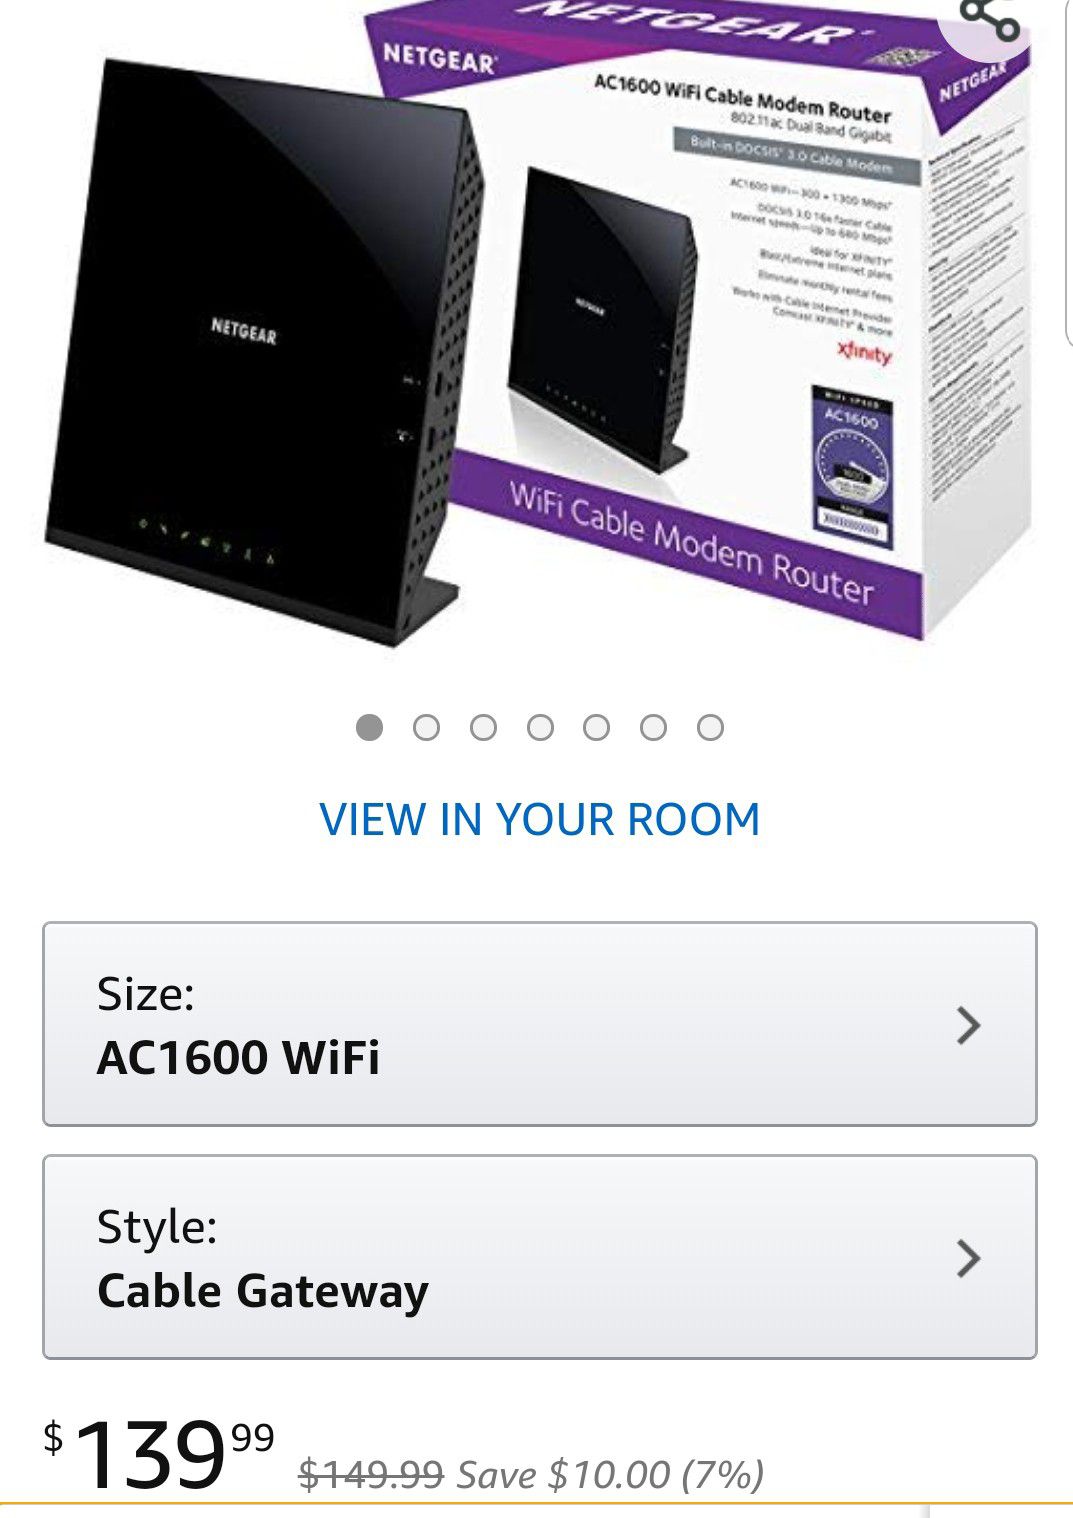 Netgear C6250-100NAS AC1600 (16x4) WiFi Cable Modem Router Combo (C6250) DOCSIS 3.0 Certified for Xfinity Comcast, Time Warner